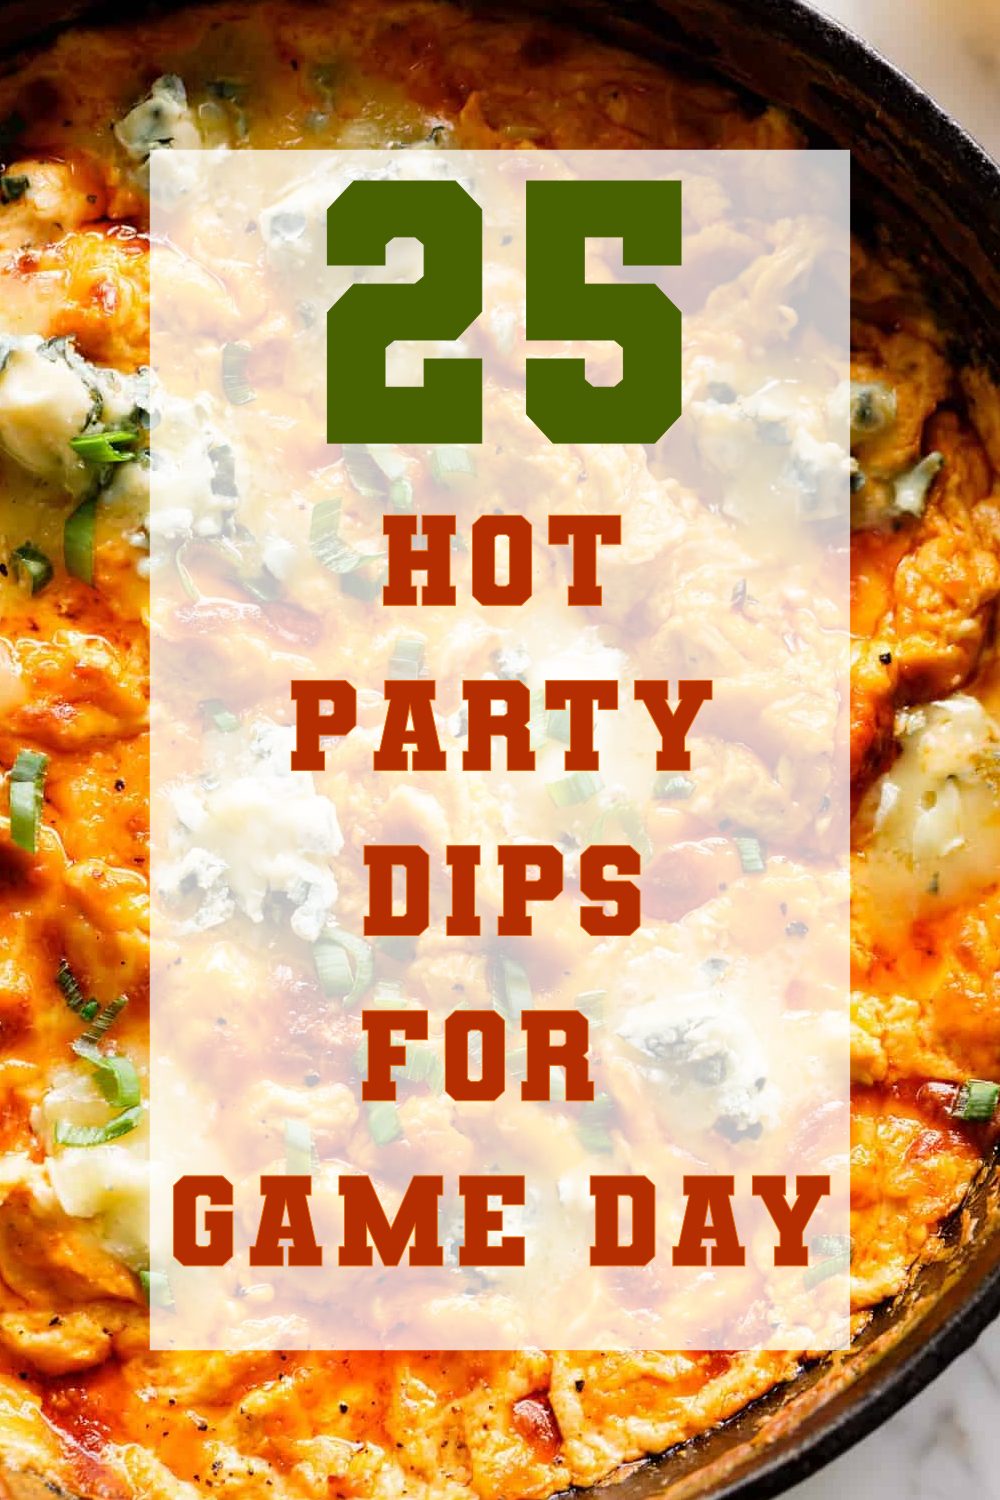 Promotional Graphic for Hot Party Dips